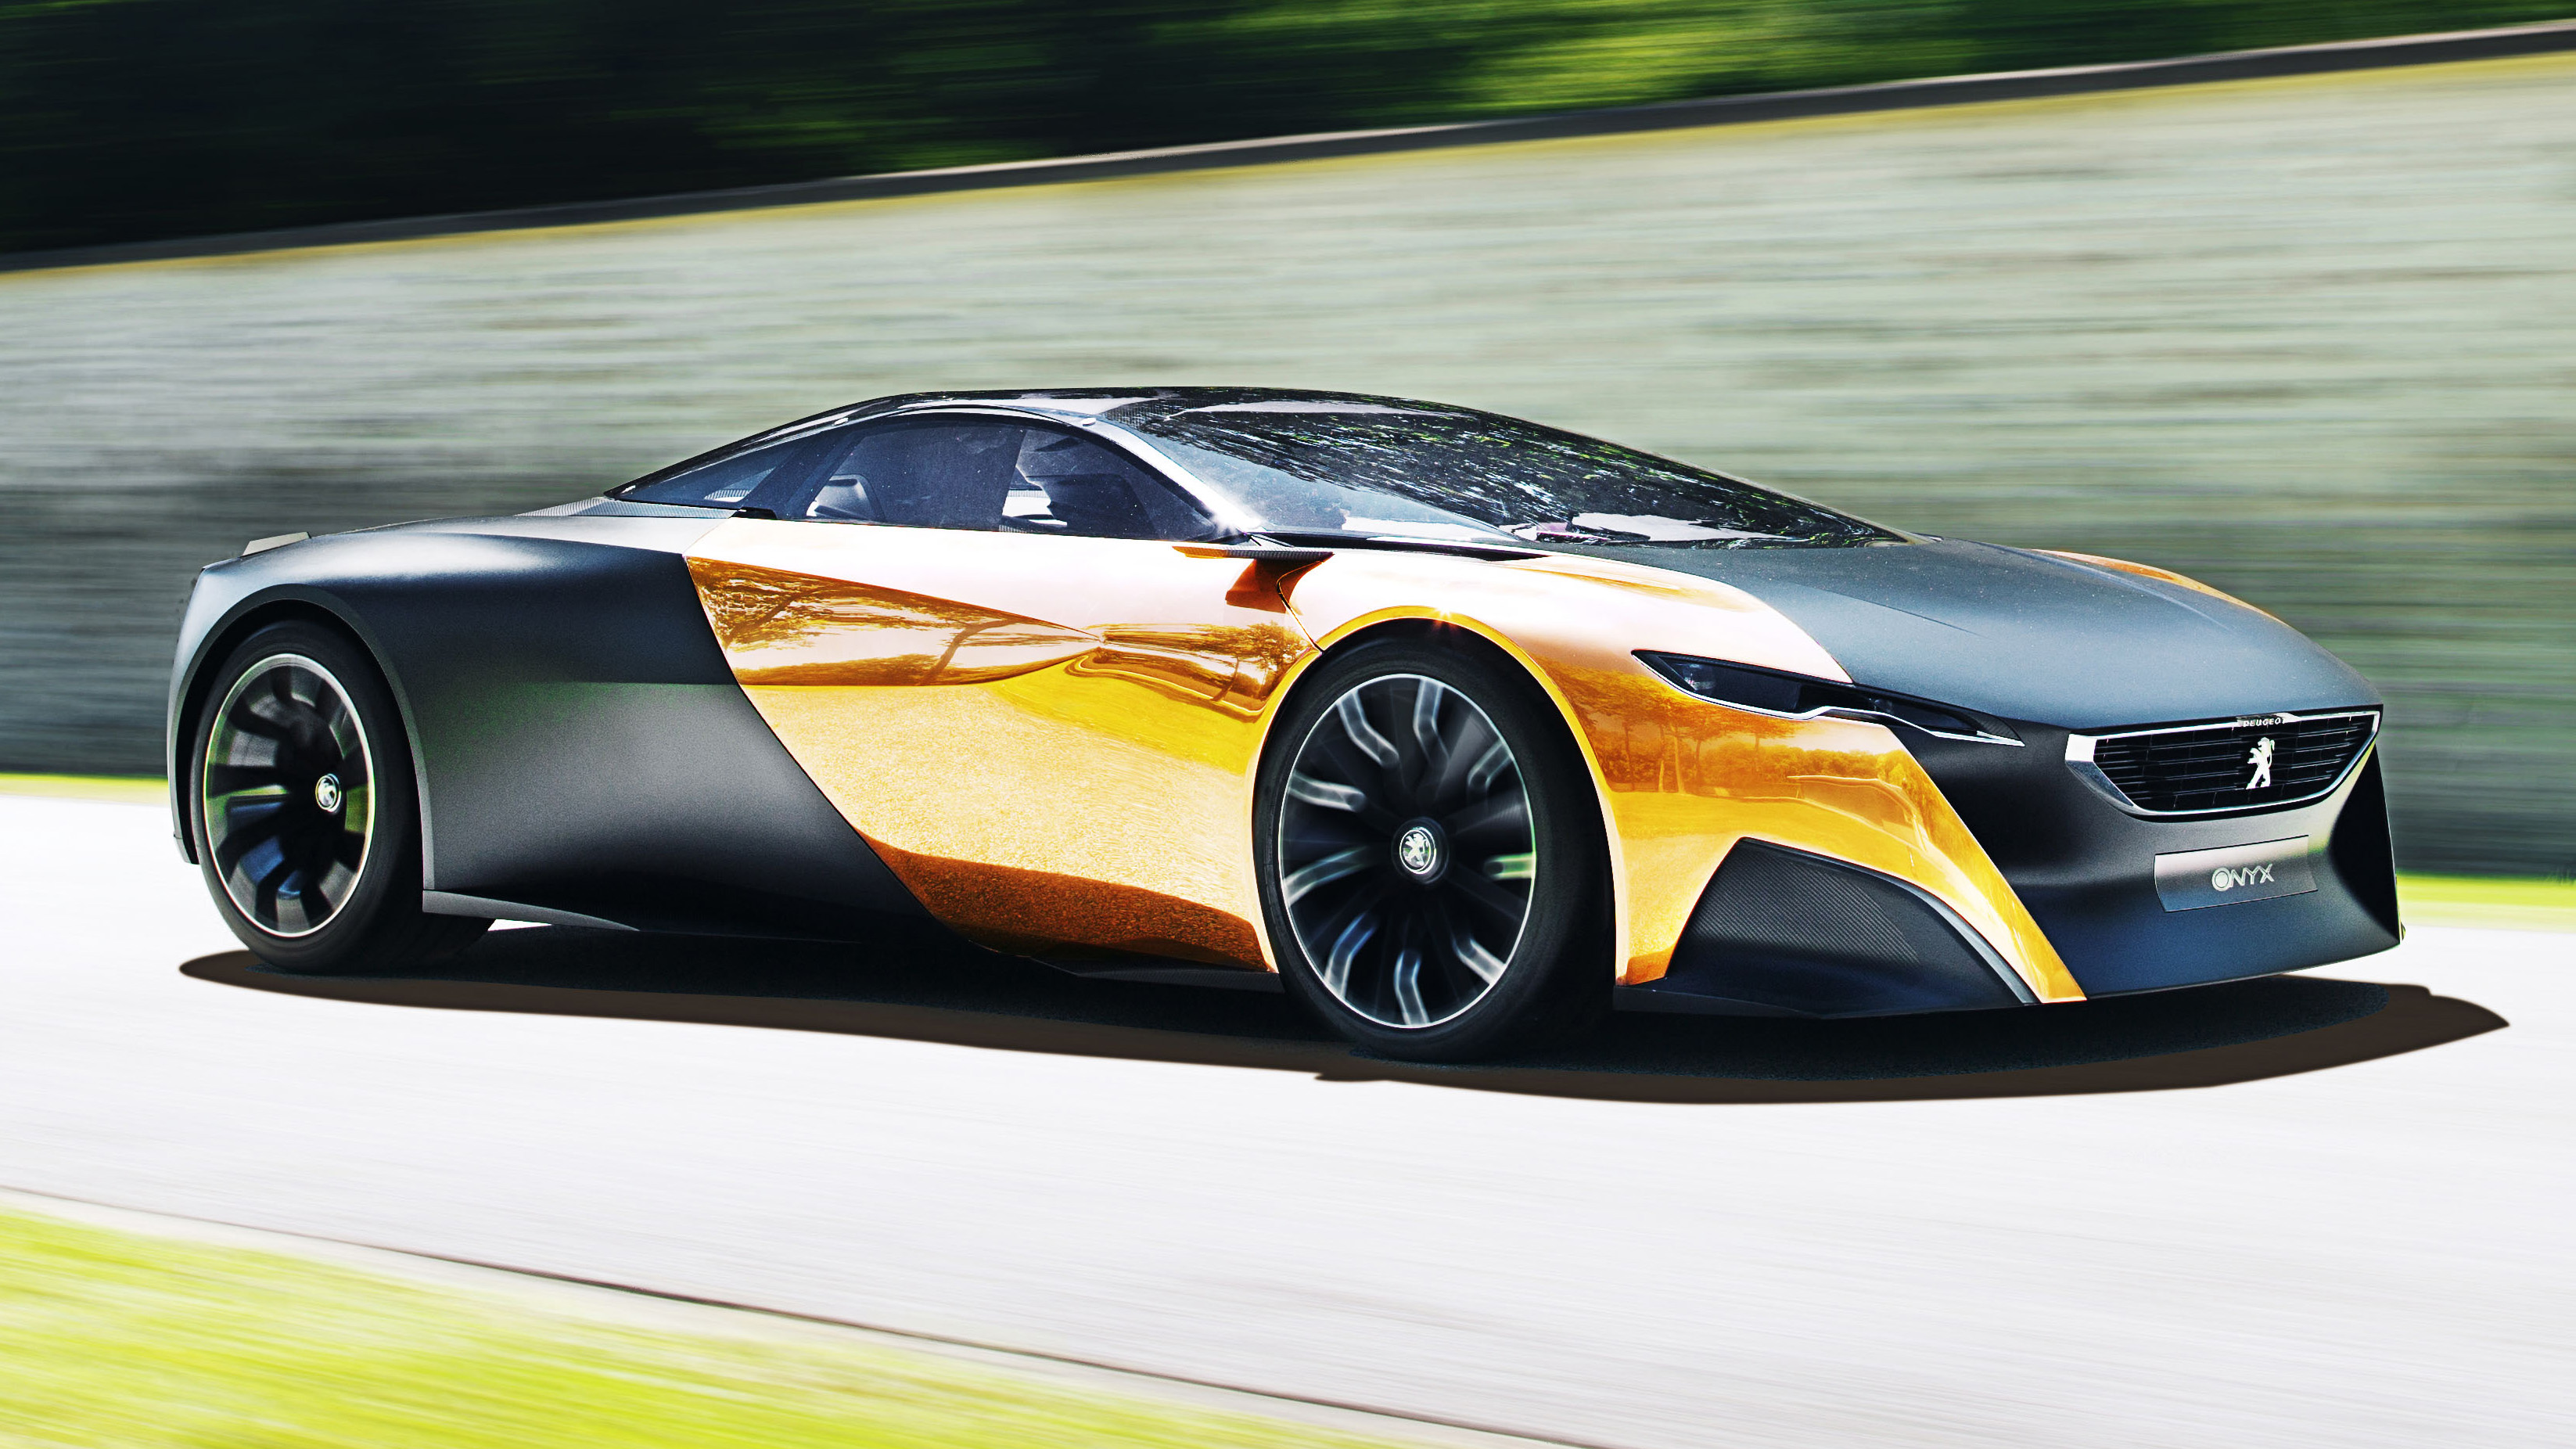 Materials science: the Peugeot Onyx